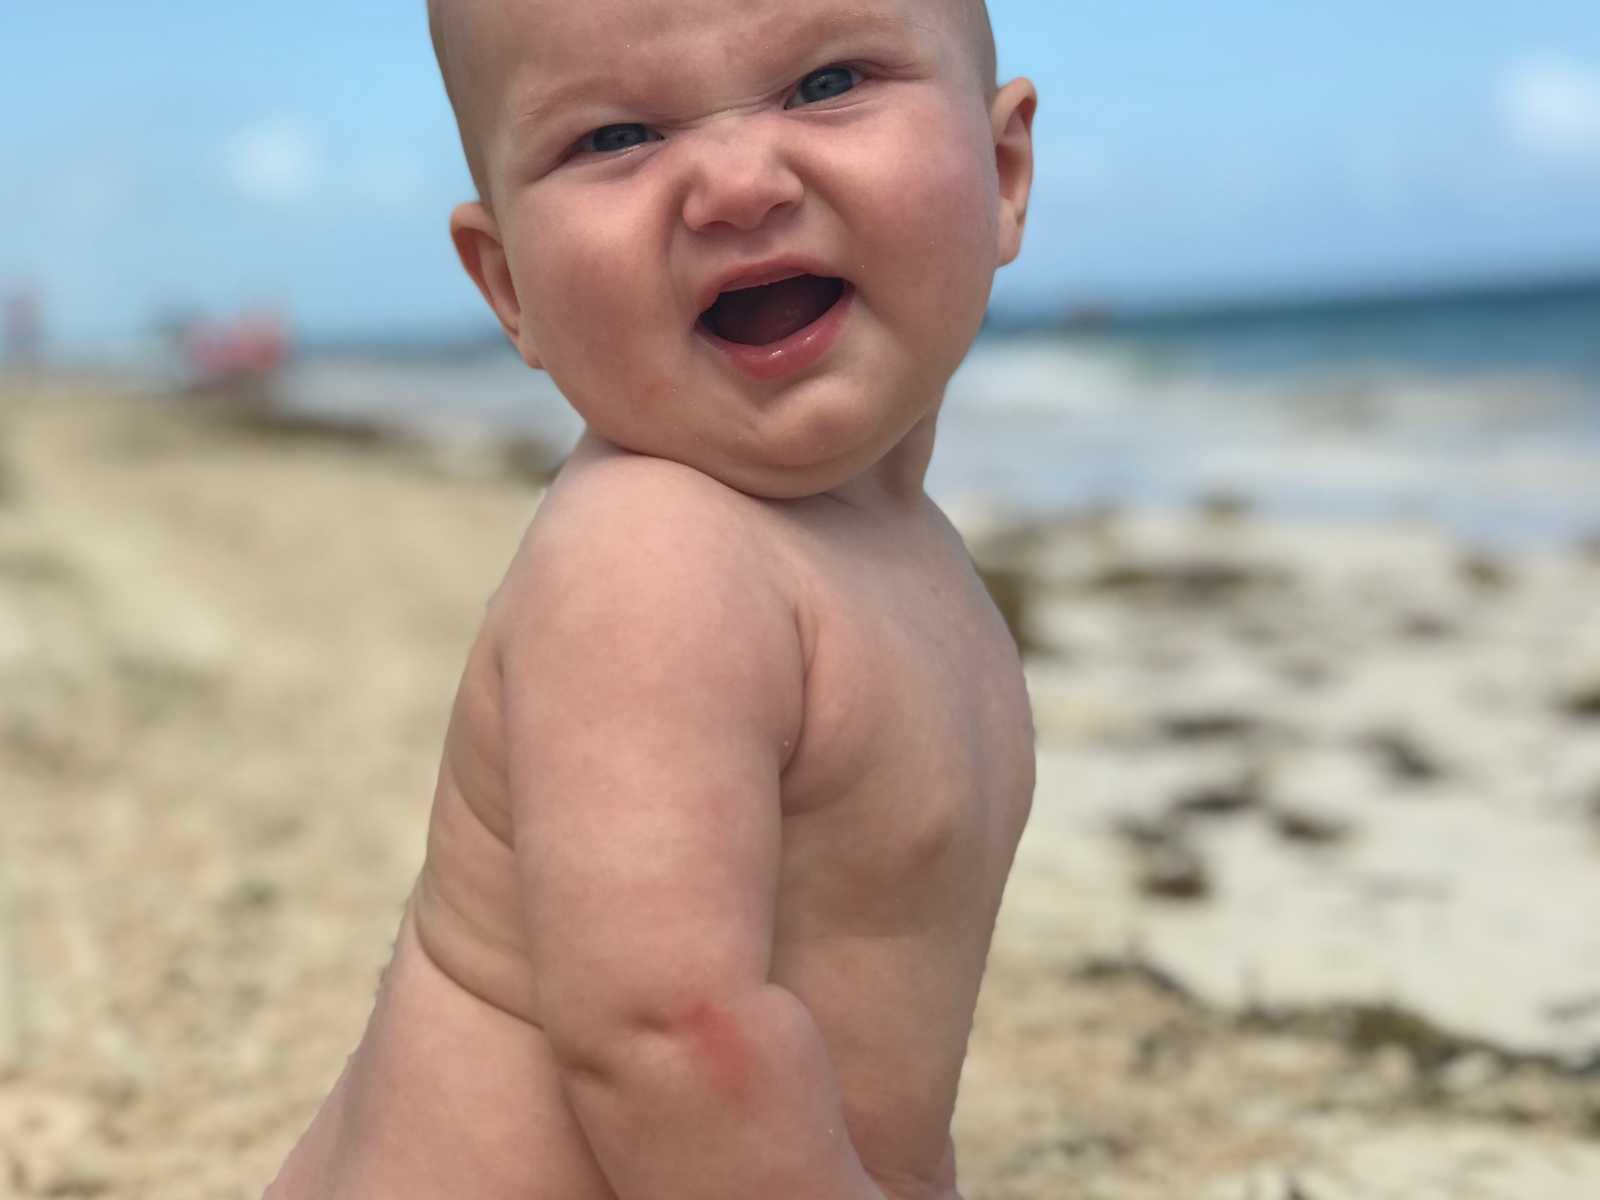 Baby whose mother has postpartum thyroid condition without bathing suit on makes funny face at beach